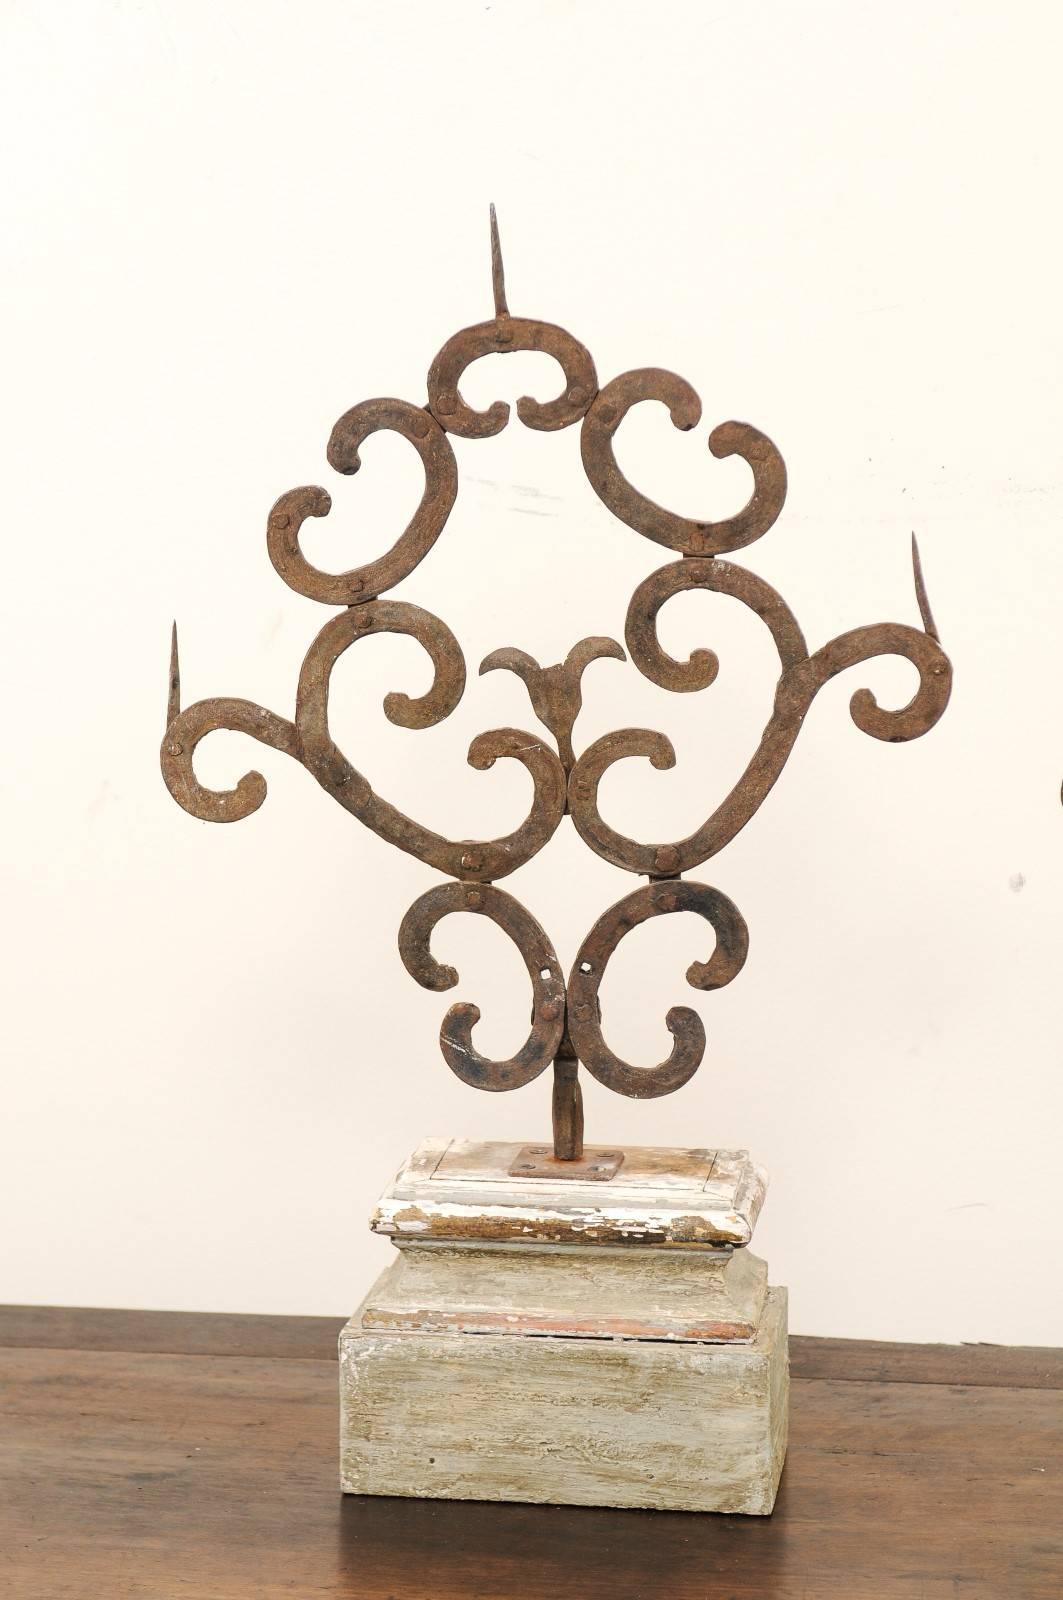 Rustic Pair of 18th Century Italian Hand-Forged Iron Prickets Mounted on Painted Wood